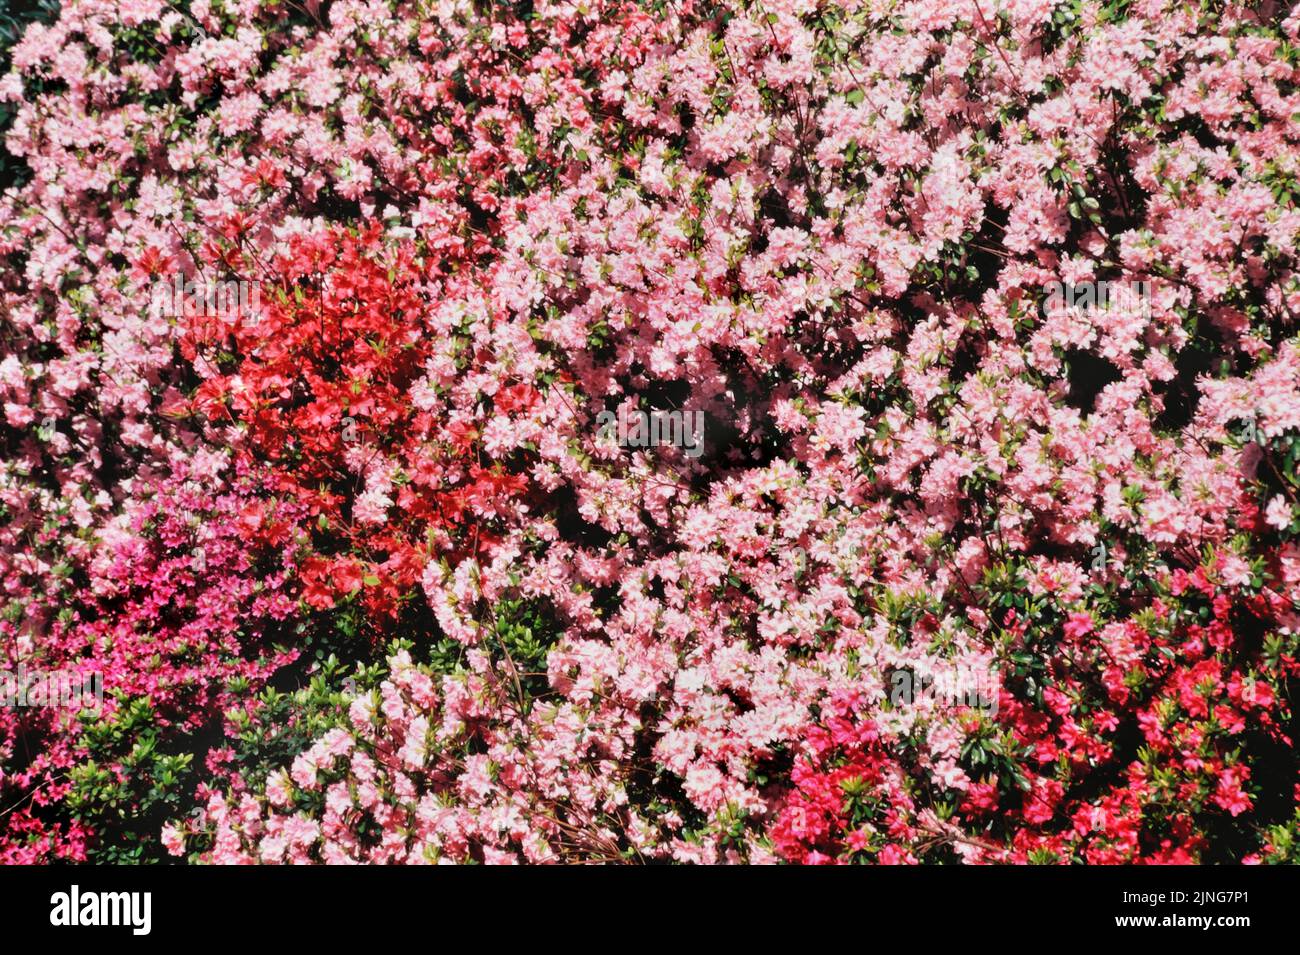 Flowers, Rhododendron hedge. Stock Photo